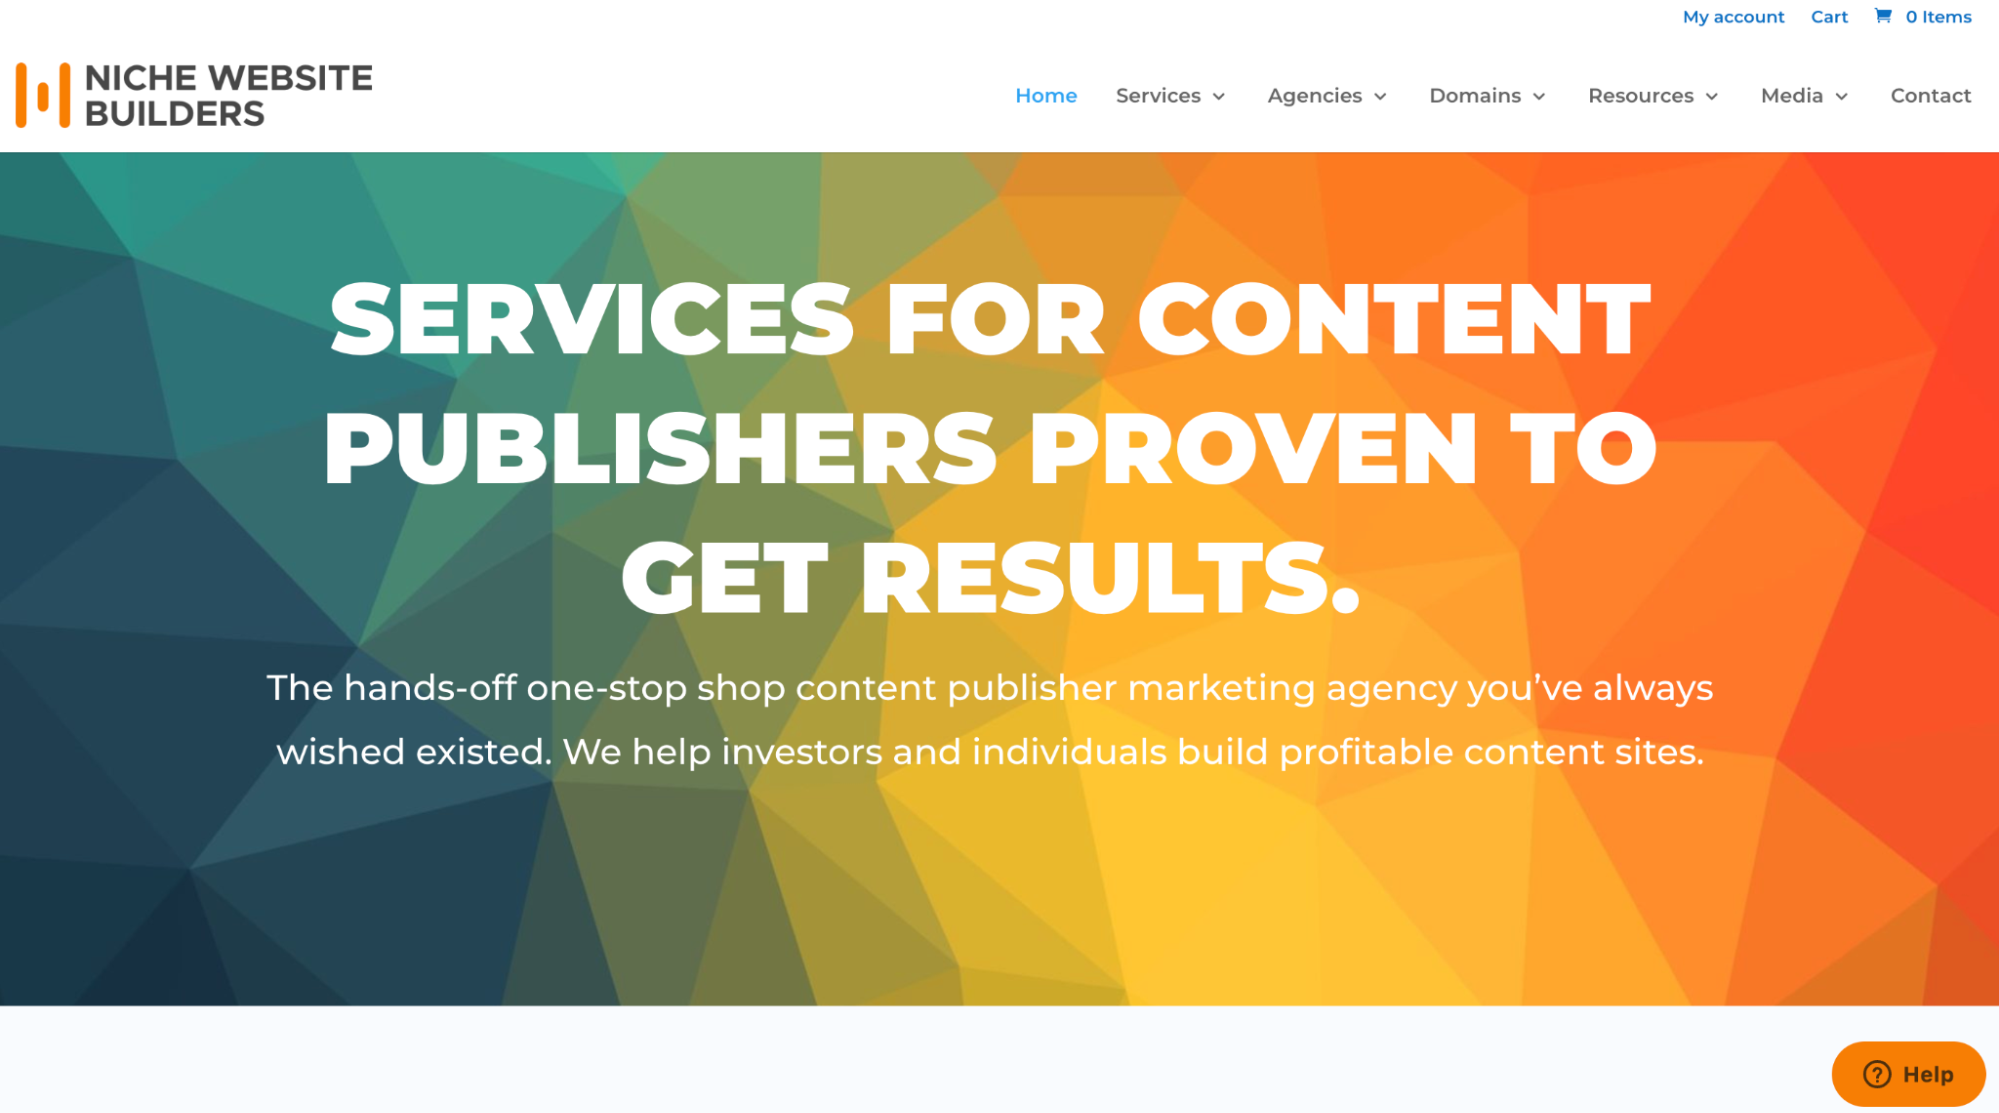 Adsy guest posting services for buyers and publishers